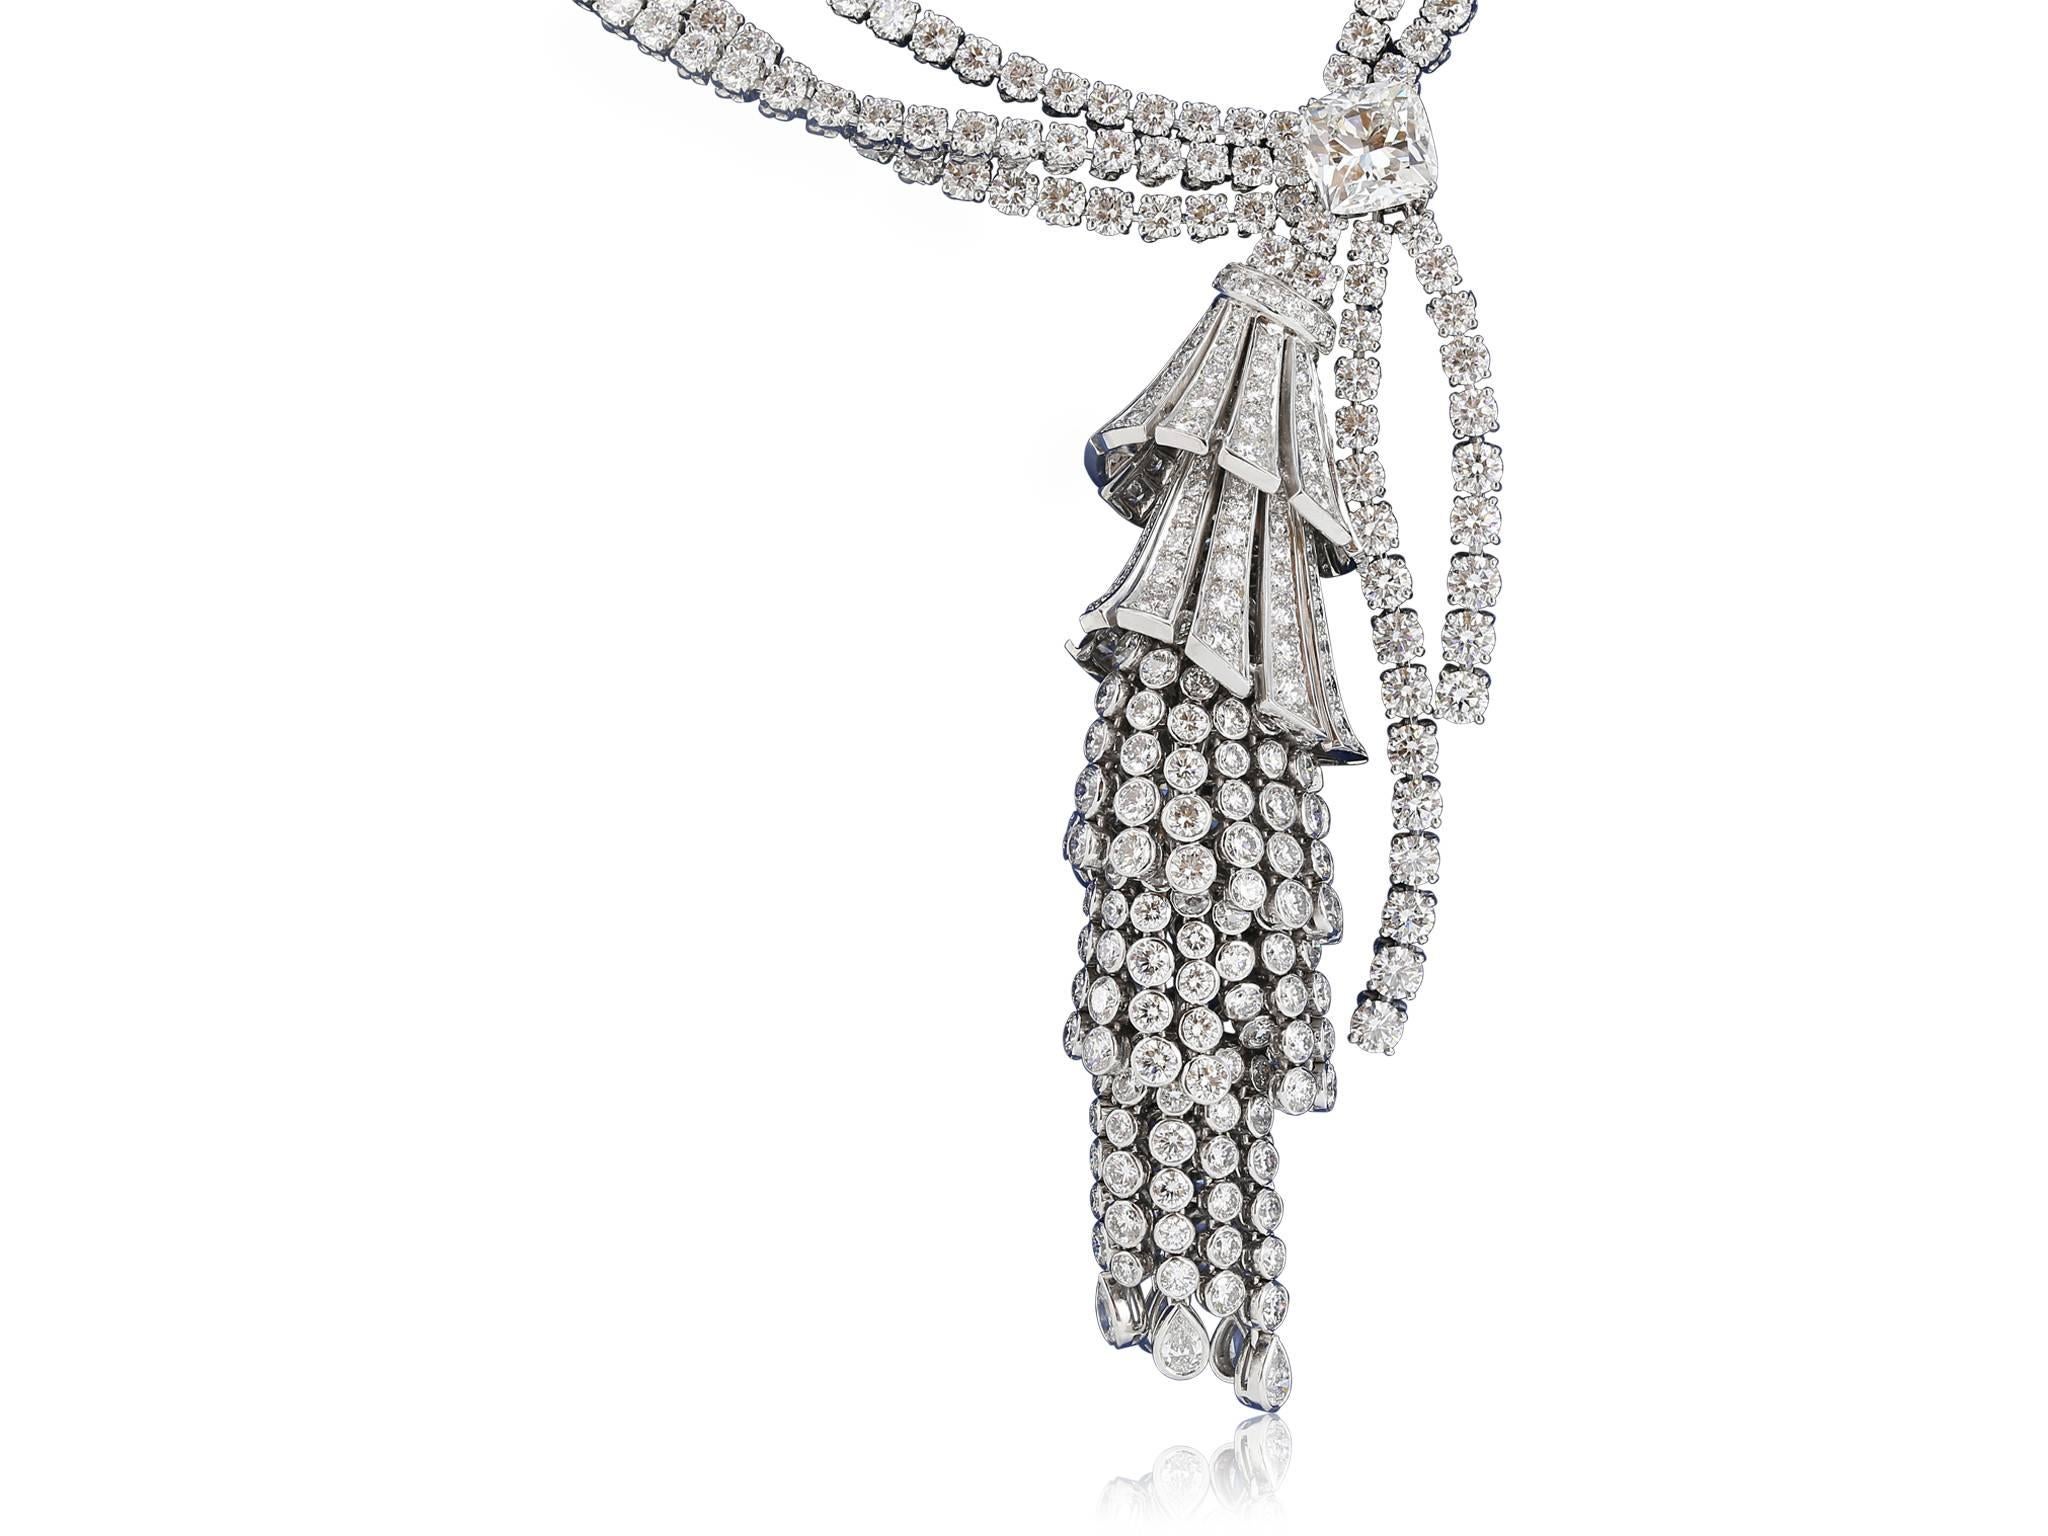 18 karat white one of a kind Boucheron estate diamond tassel necklace,  with 6 groups of diamonds, cascading down the multi strand tassel, diamond paves, round diamond bezels and finishing with pear shape diamond bezels. The necklace has 3 rows of